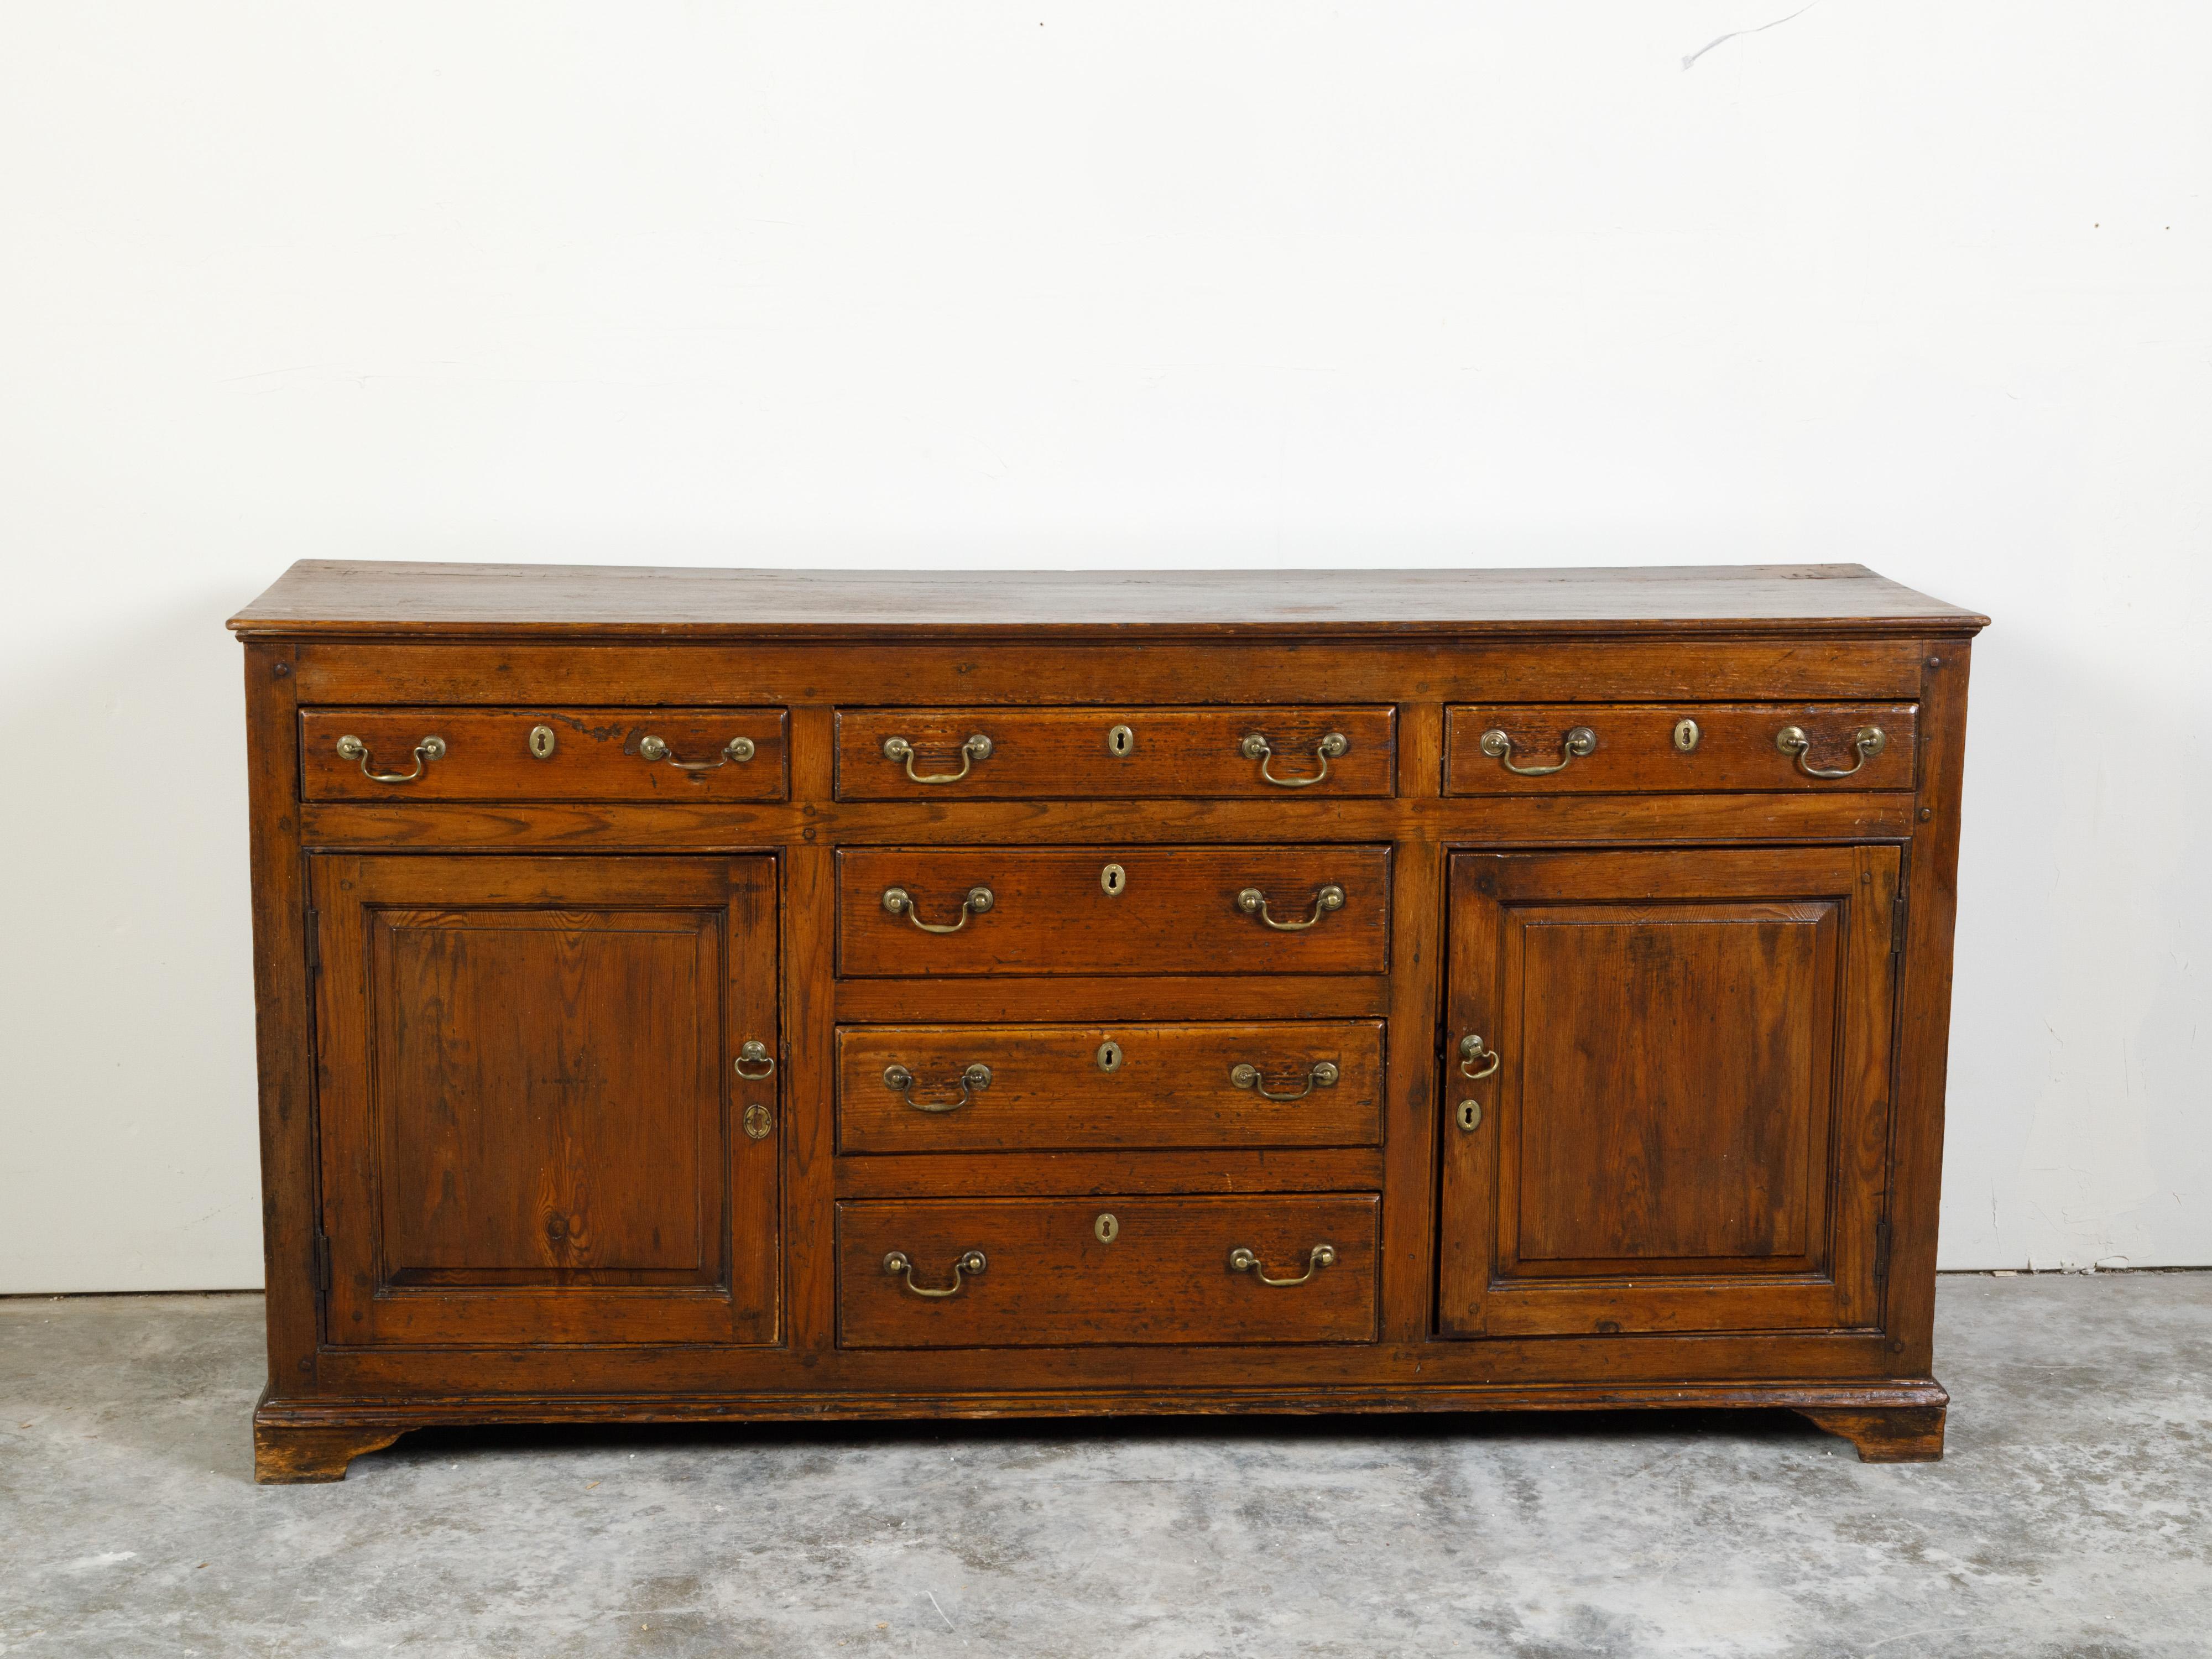 An English Georgian period oak dresser base from the early 19th century, with six drawers, two doors and peg construction. Created in England during the early years of the 19th century, this oak dresser base features a rectangular top sitting above